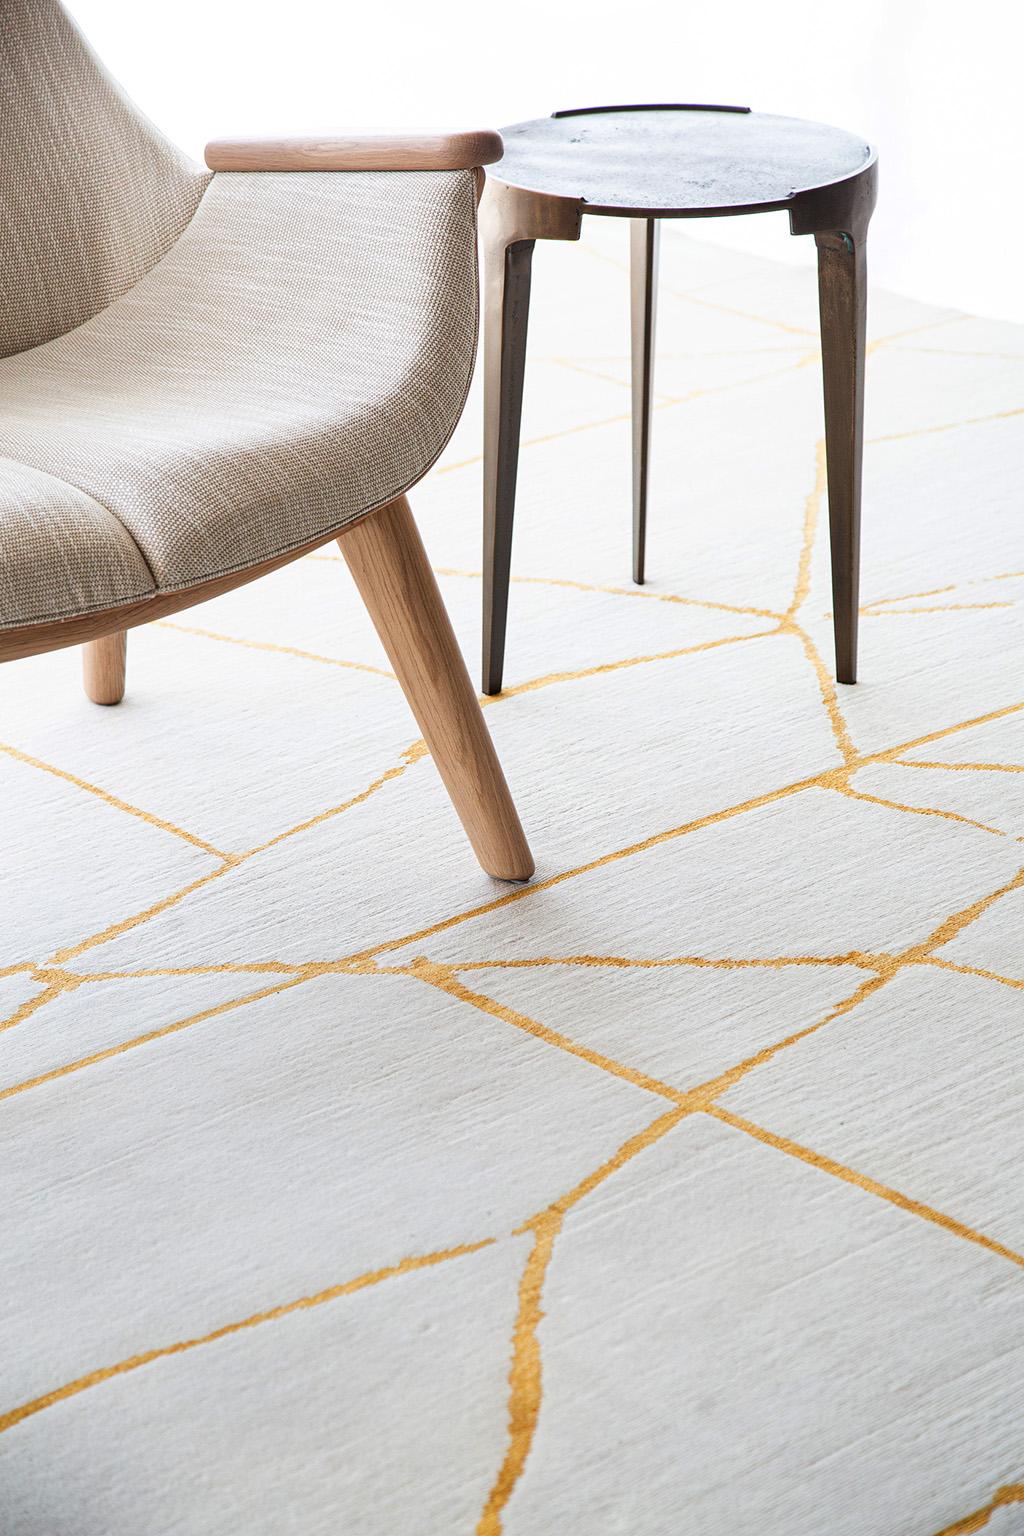 'Release' is a handwoven modern abstract rug made of wool and silk. It is a part of the Design Rhymes collection which pulls inspiration from aspects of architecture. Strong contrasting gold lines create cracks through the white rug making a